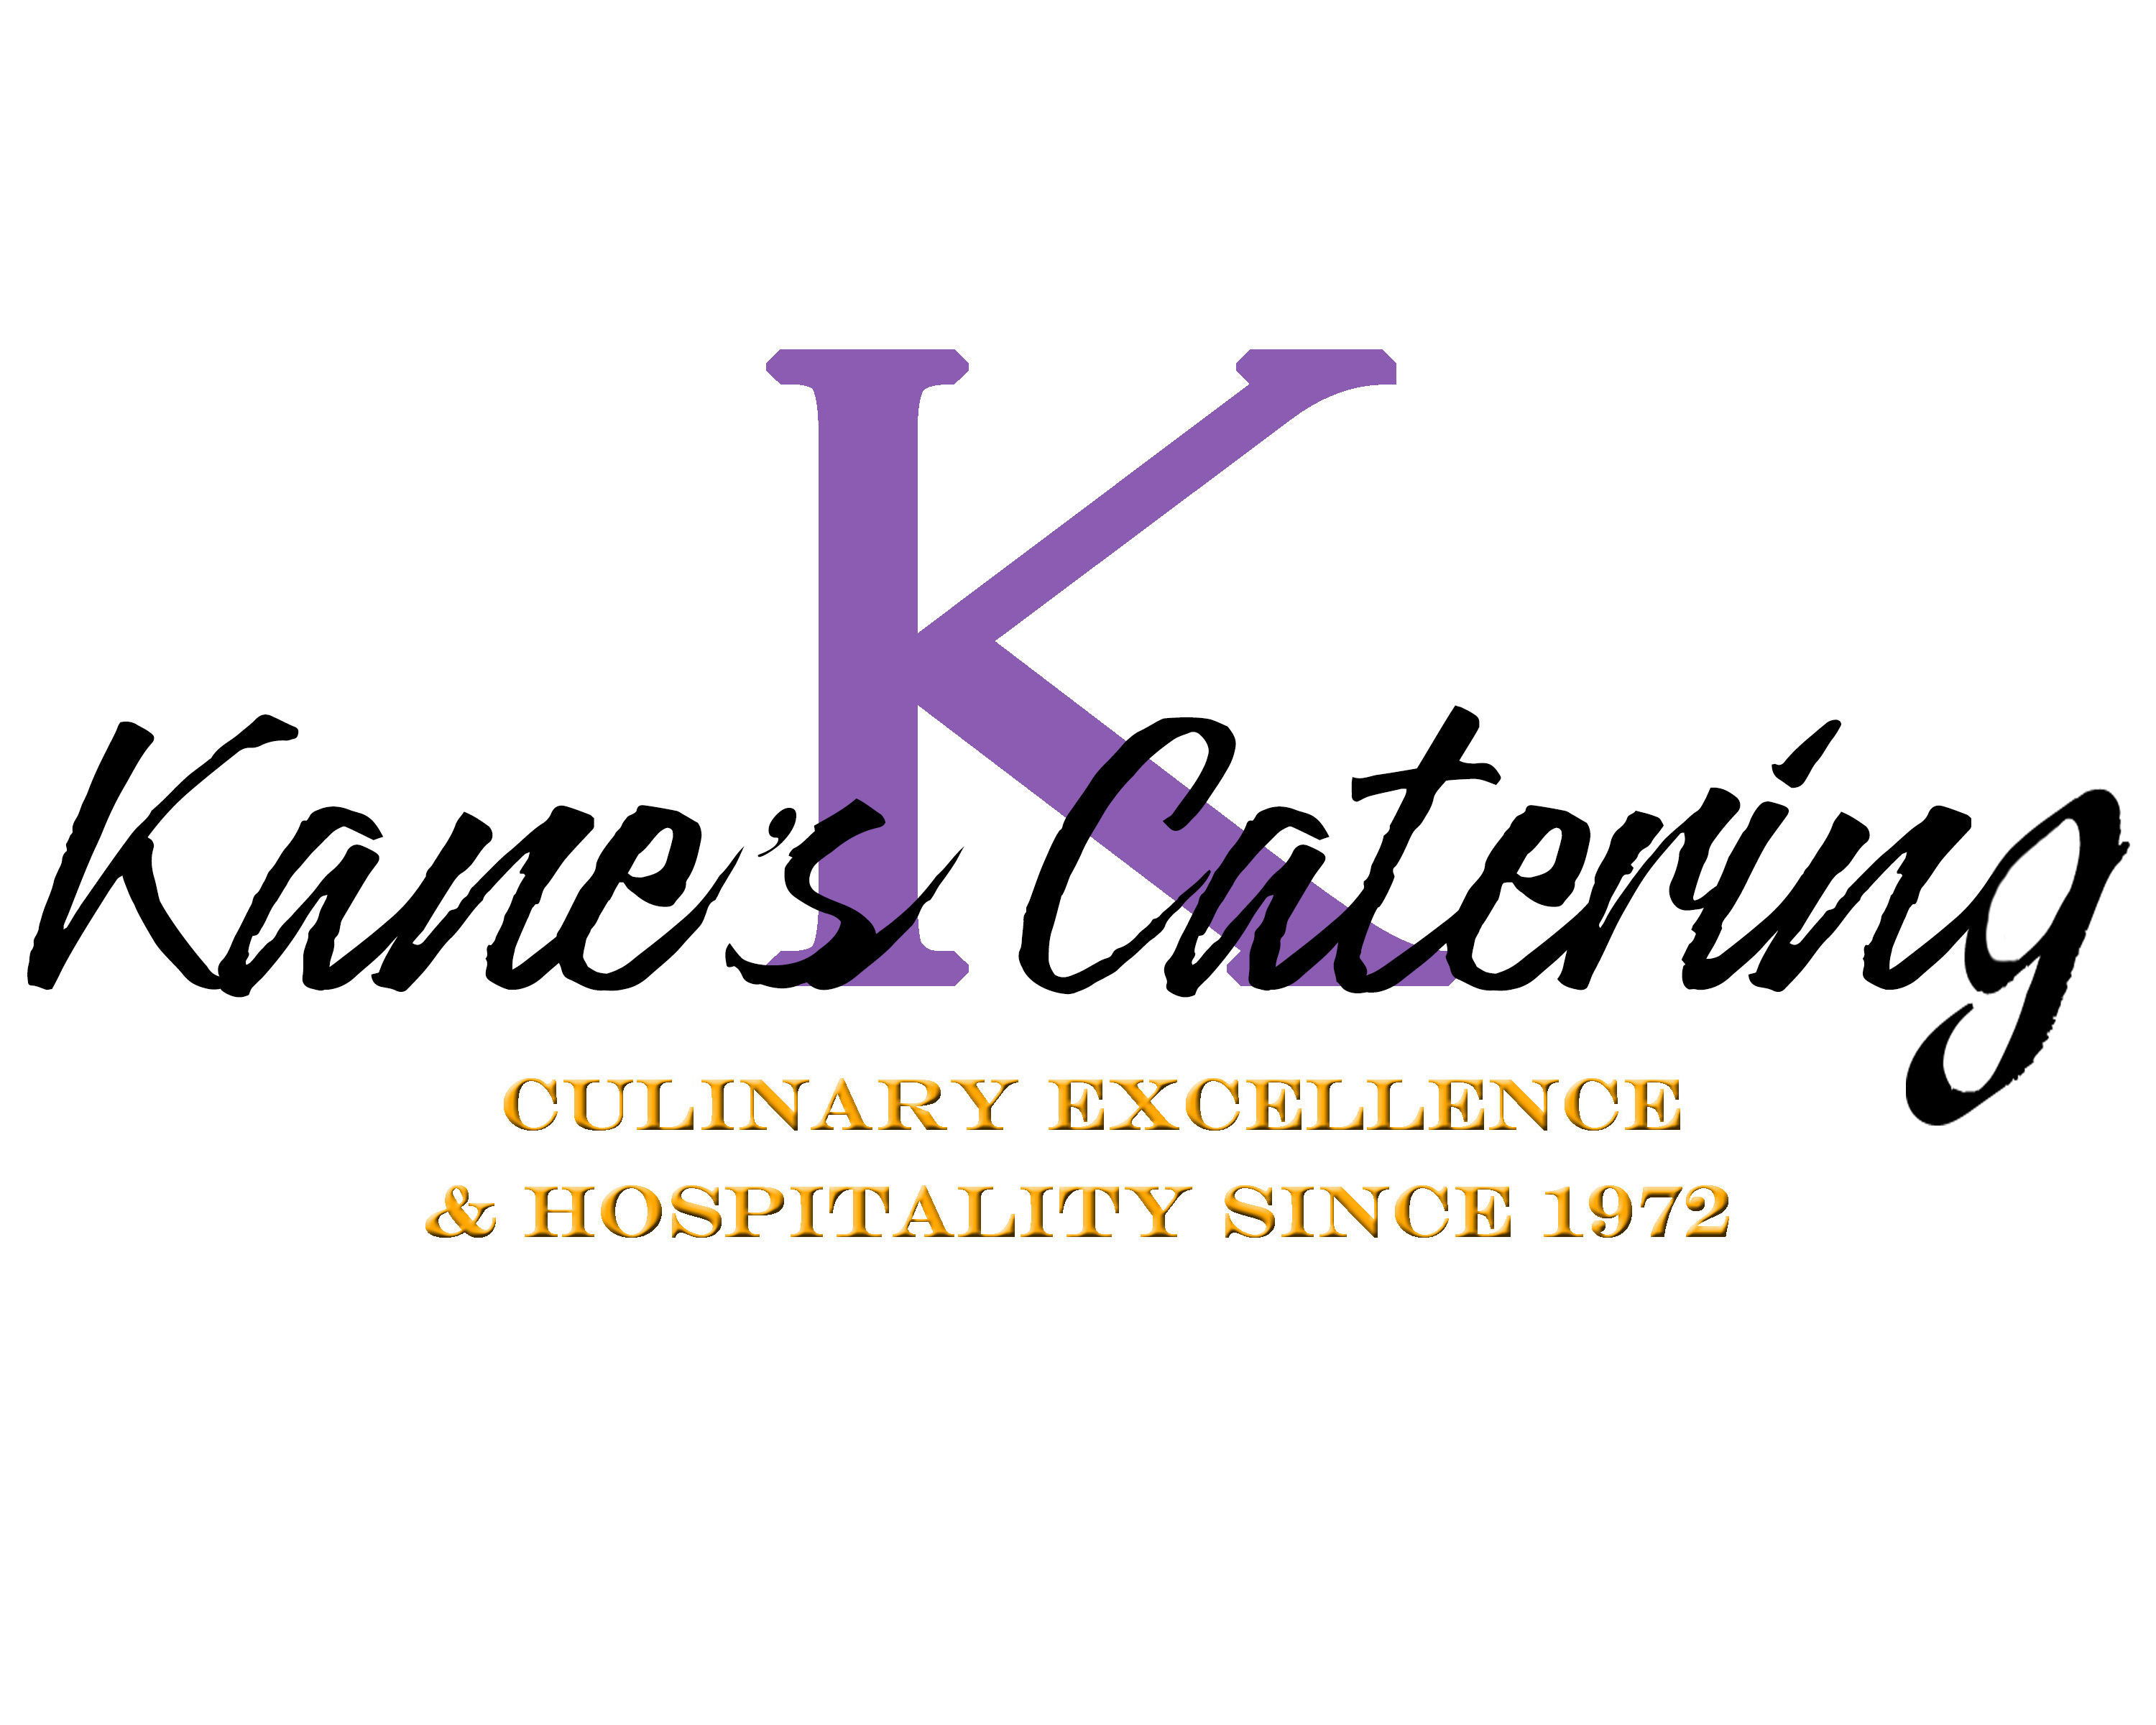 Kane's Catering written in black over purple K. Culinary Excellence & Hospitality since 1972 written in gold underneath